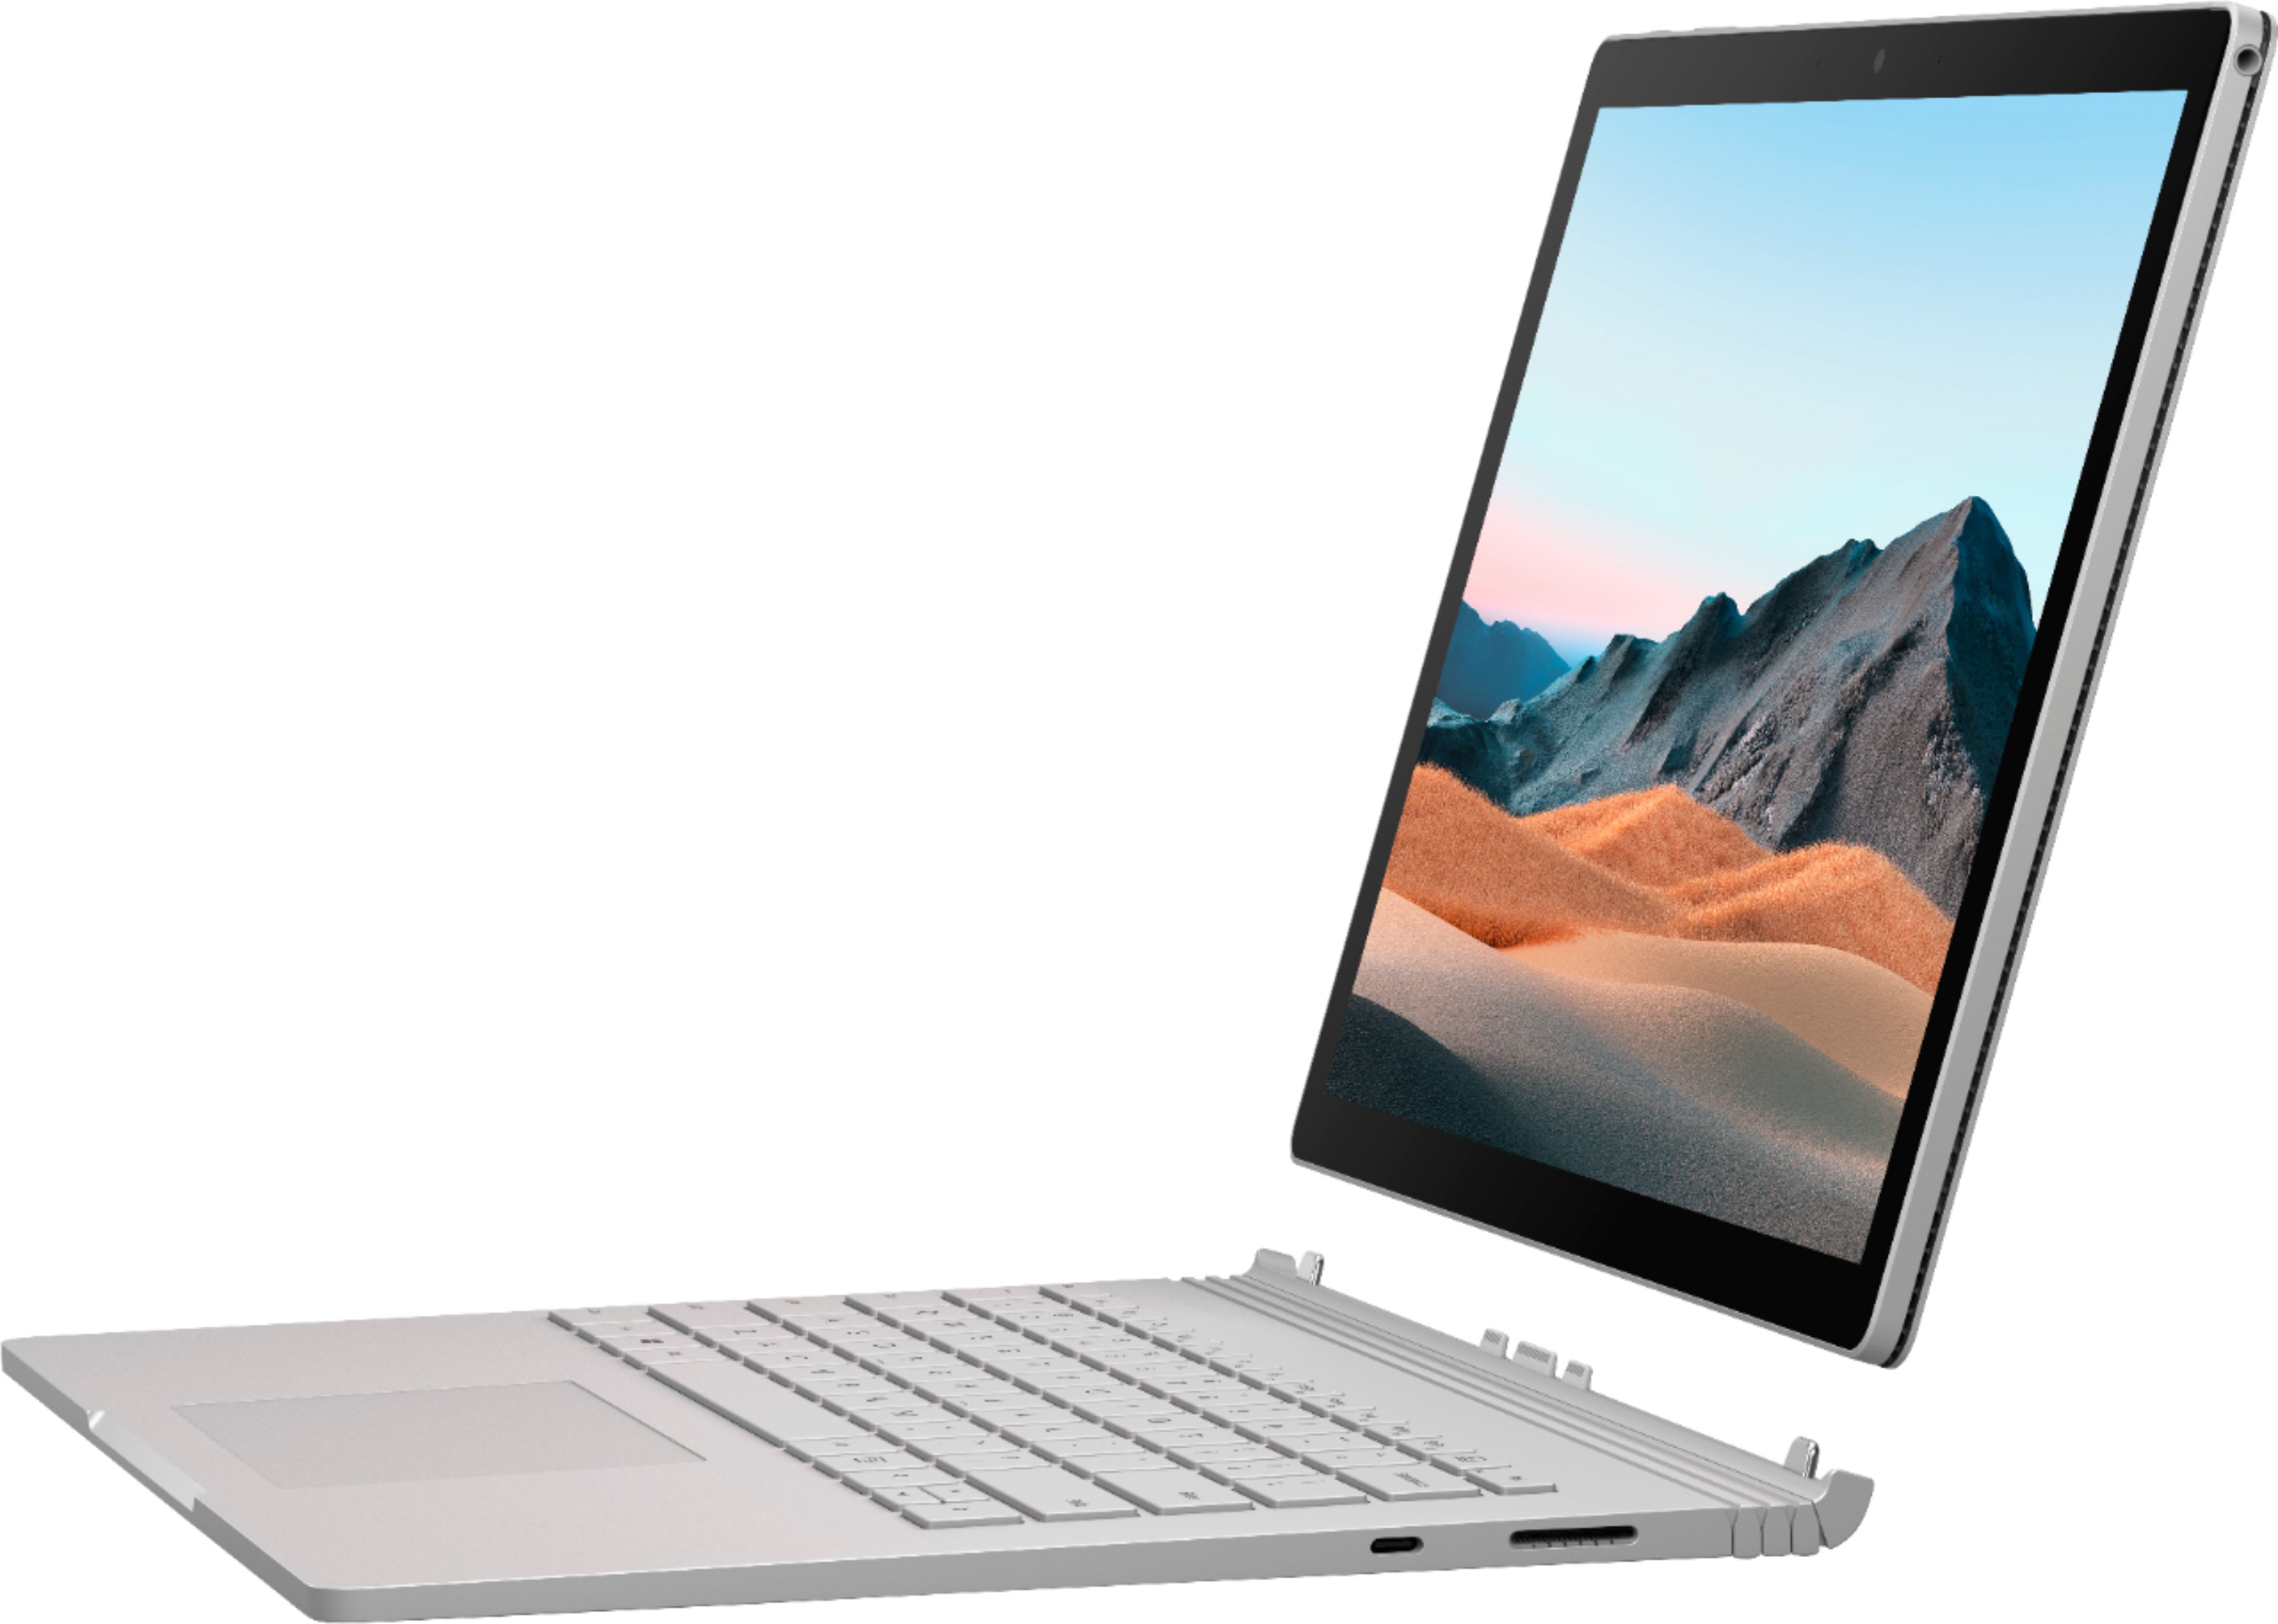 Microsoft Surface Book 3 13.5" Touch-Screen 2-in-1 Laptop Intel Core i7 Memory GeForce GTX 1650 Max-Q SSD Platinum SLK-00001 - Best Buy